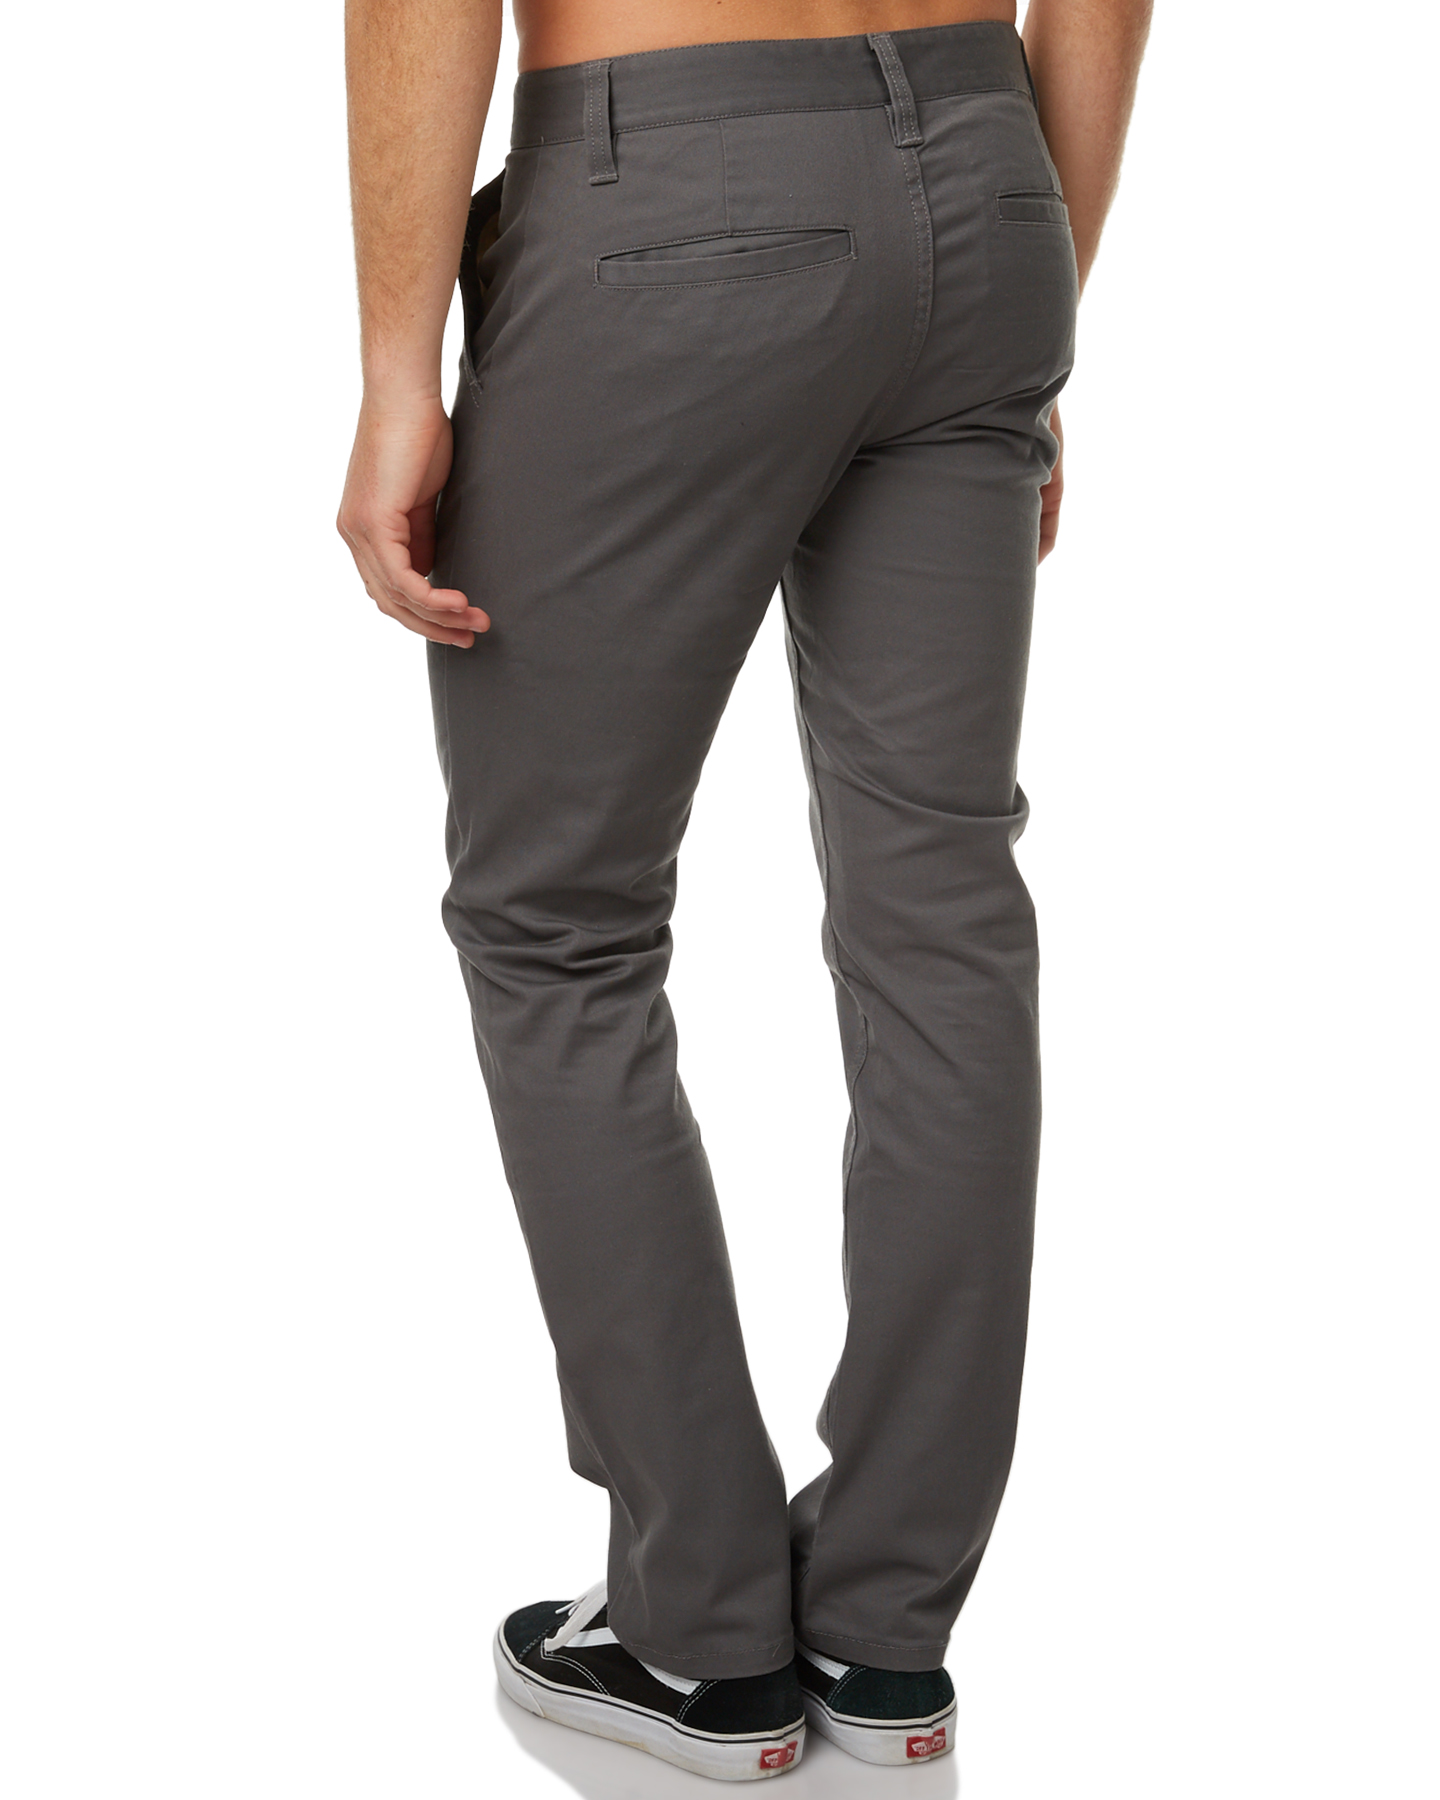 Brixton Reserve Mens Chino Pant - Charcoal | SurfStitch